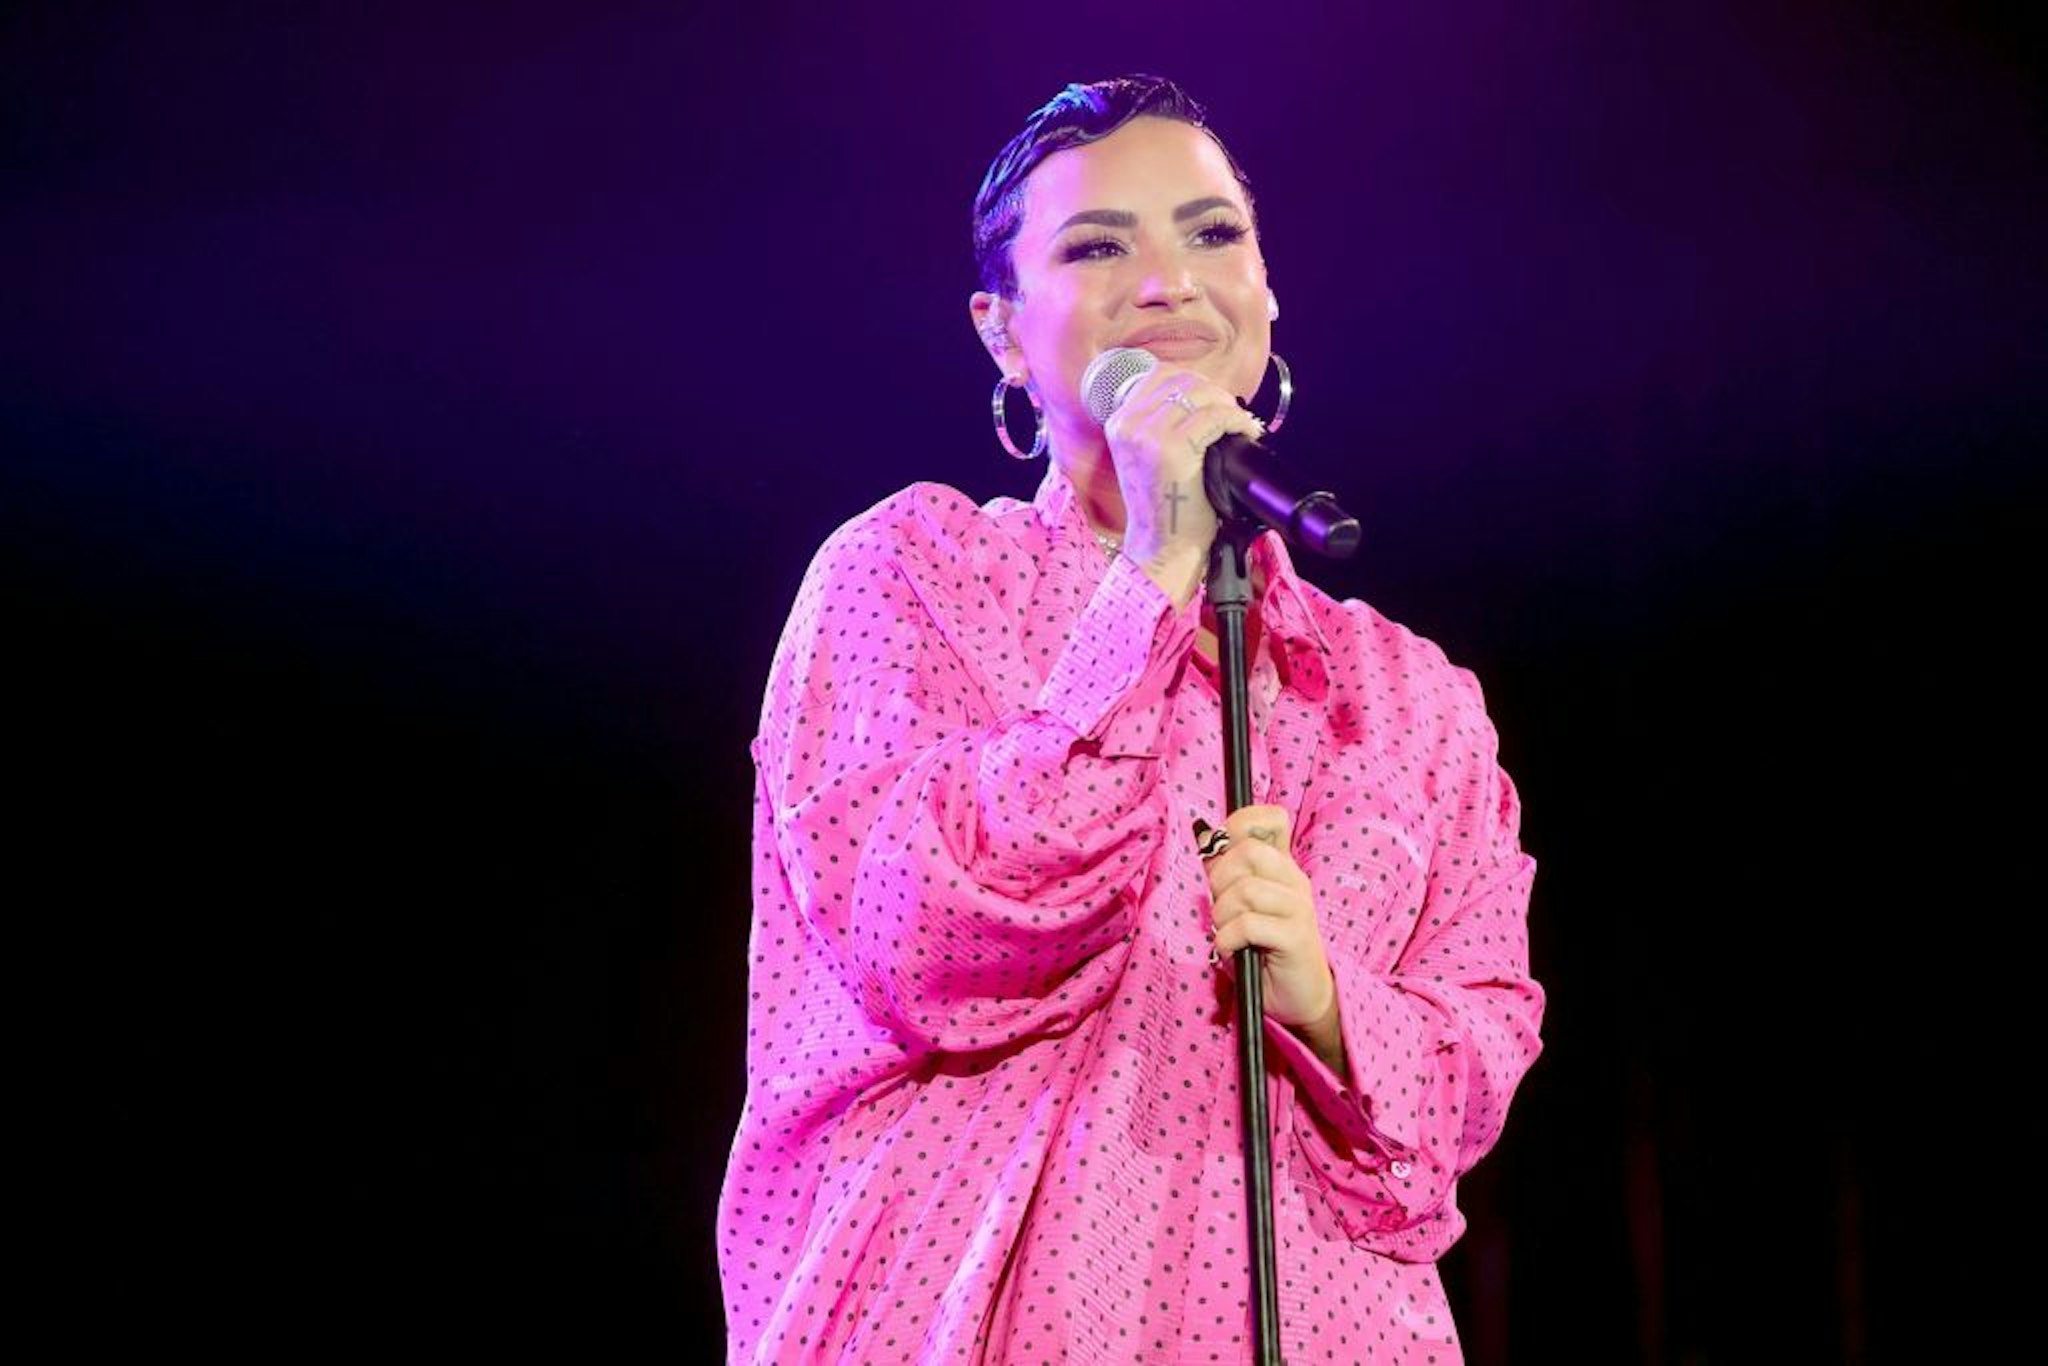 BEVERLY HILLS, CALIFORNIA - MARCH 22: Demi Lovato performs onstage during the OBB Premiere Event for YouTube Originals Docuseries "Demi Lovato: Dancing With The Devil" at The Beverly Hilton on March 22, 2021 in Beverly Hills, California.